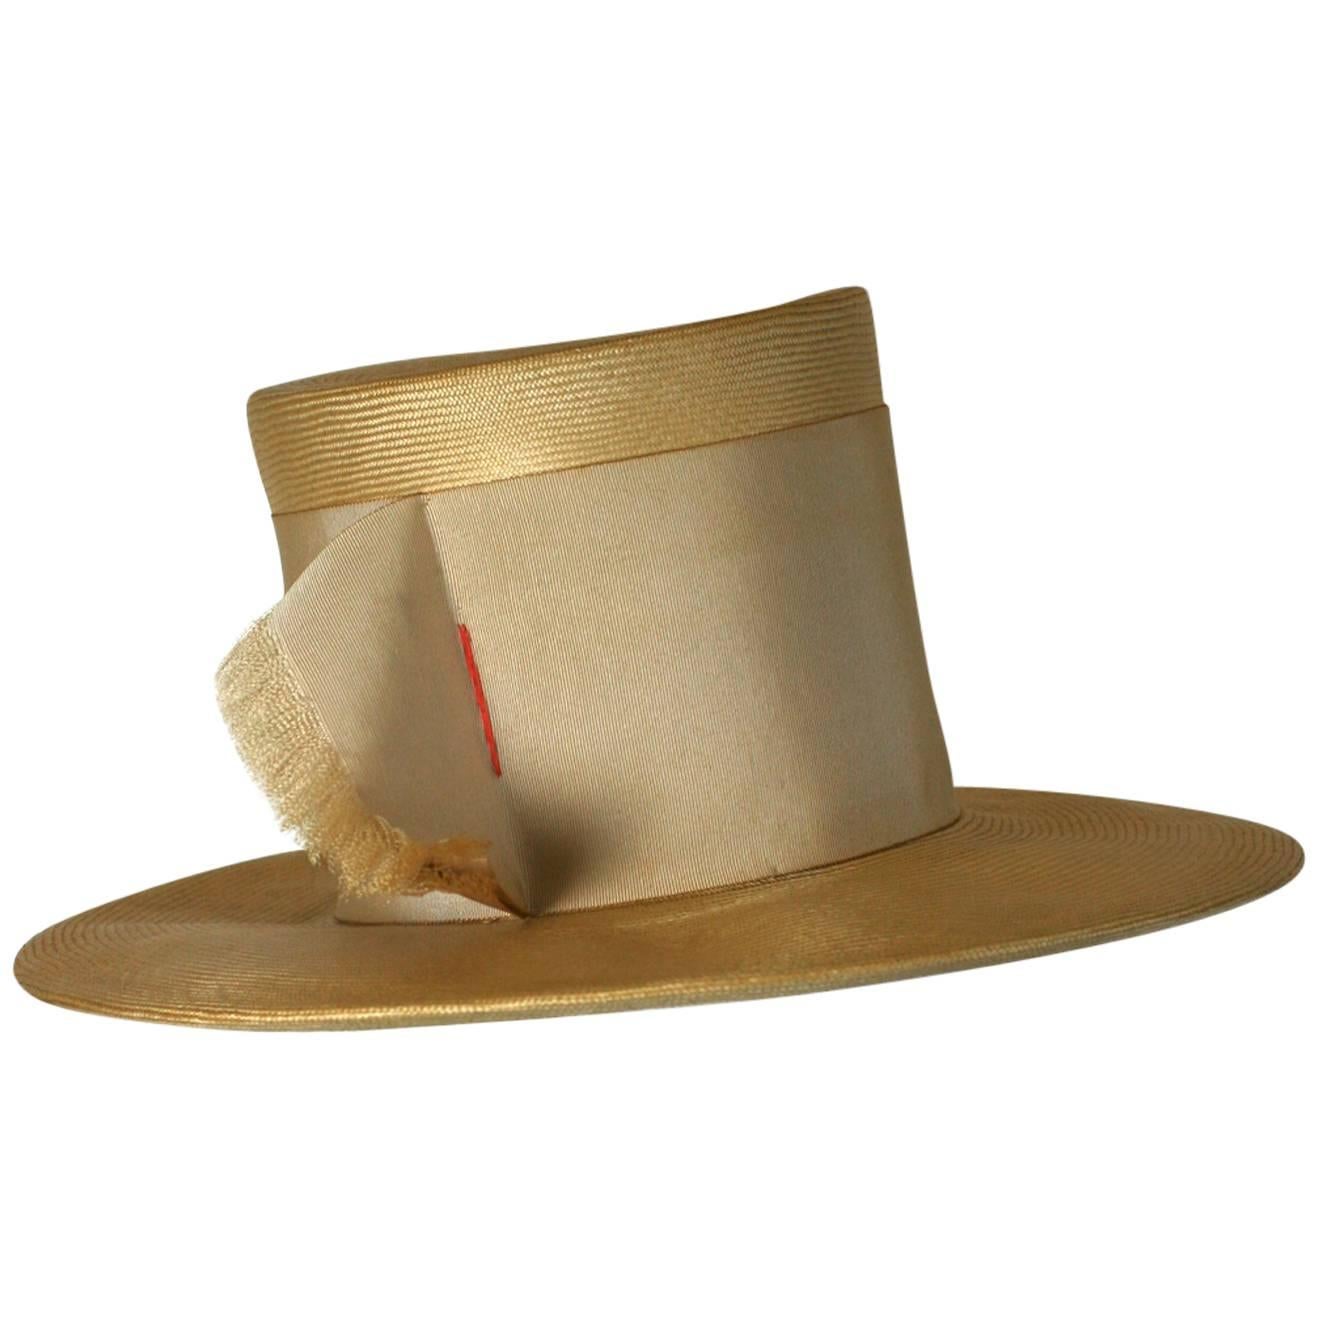 Charming Straw "Top" Hat